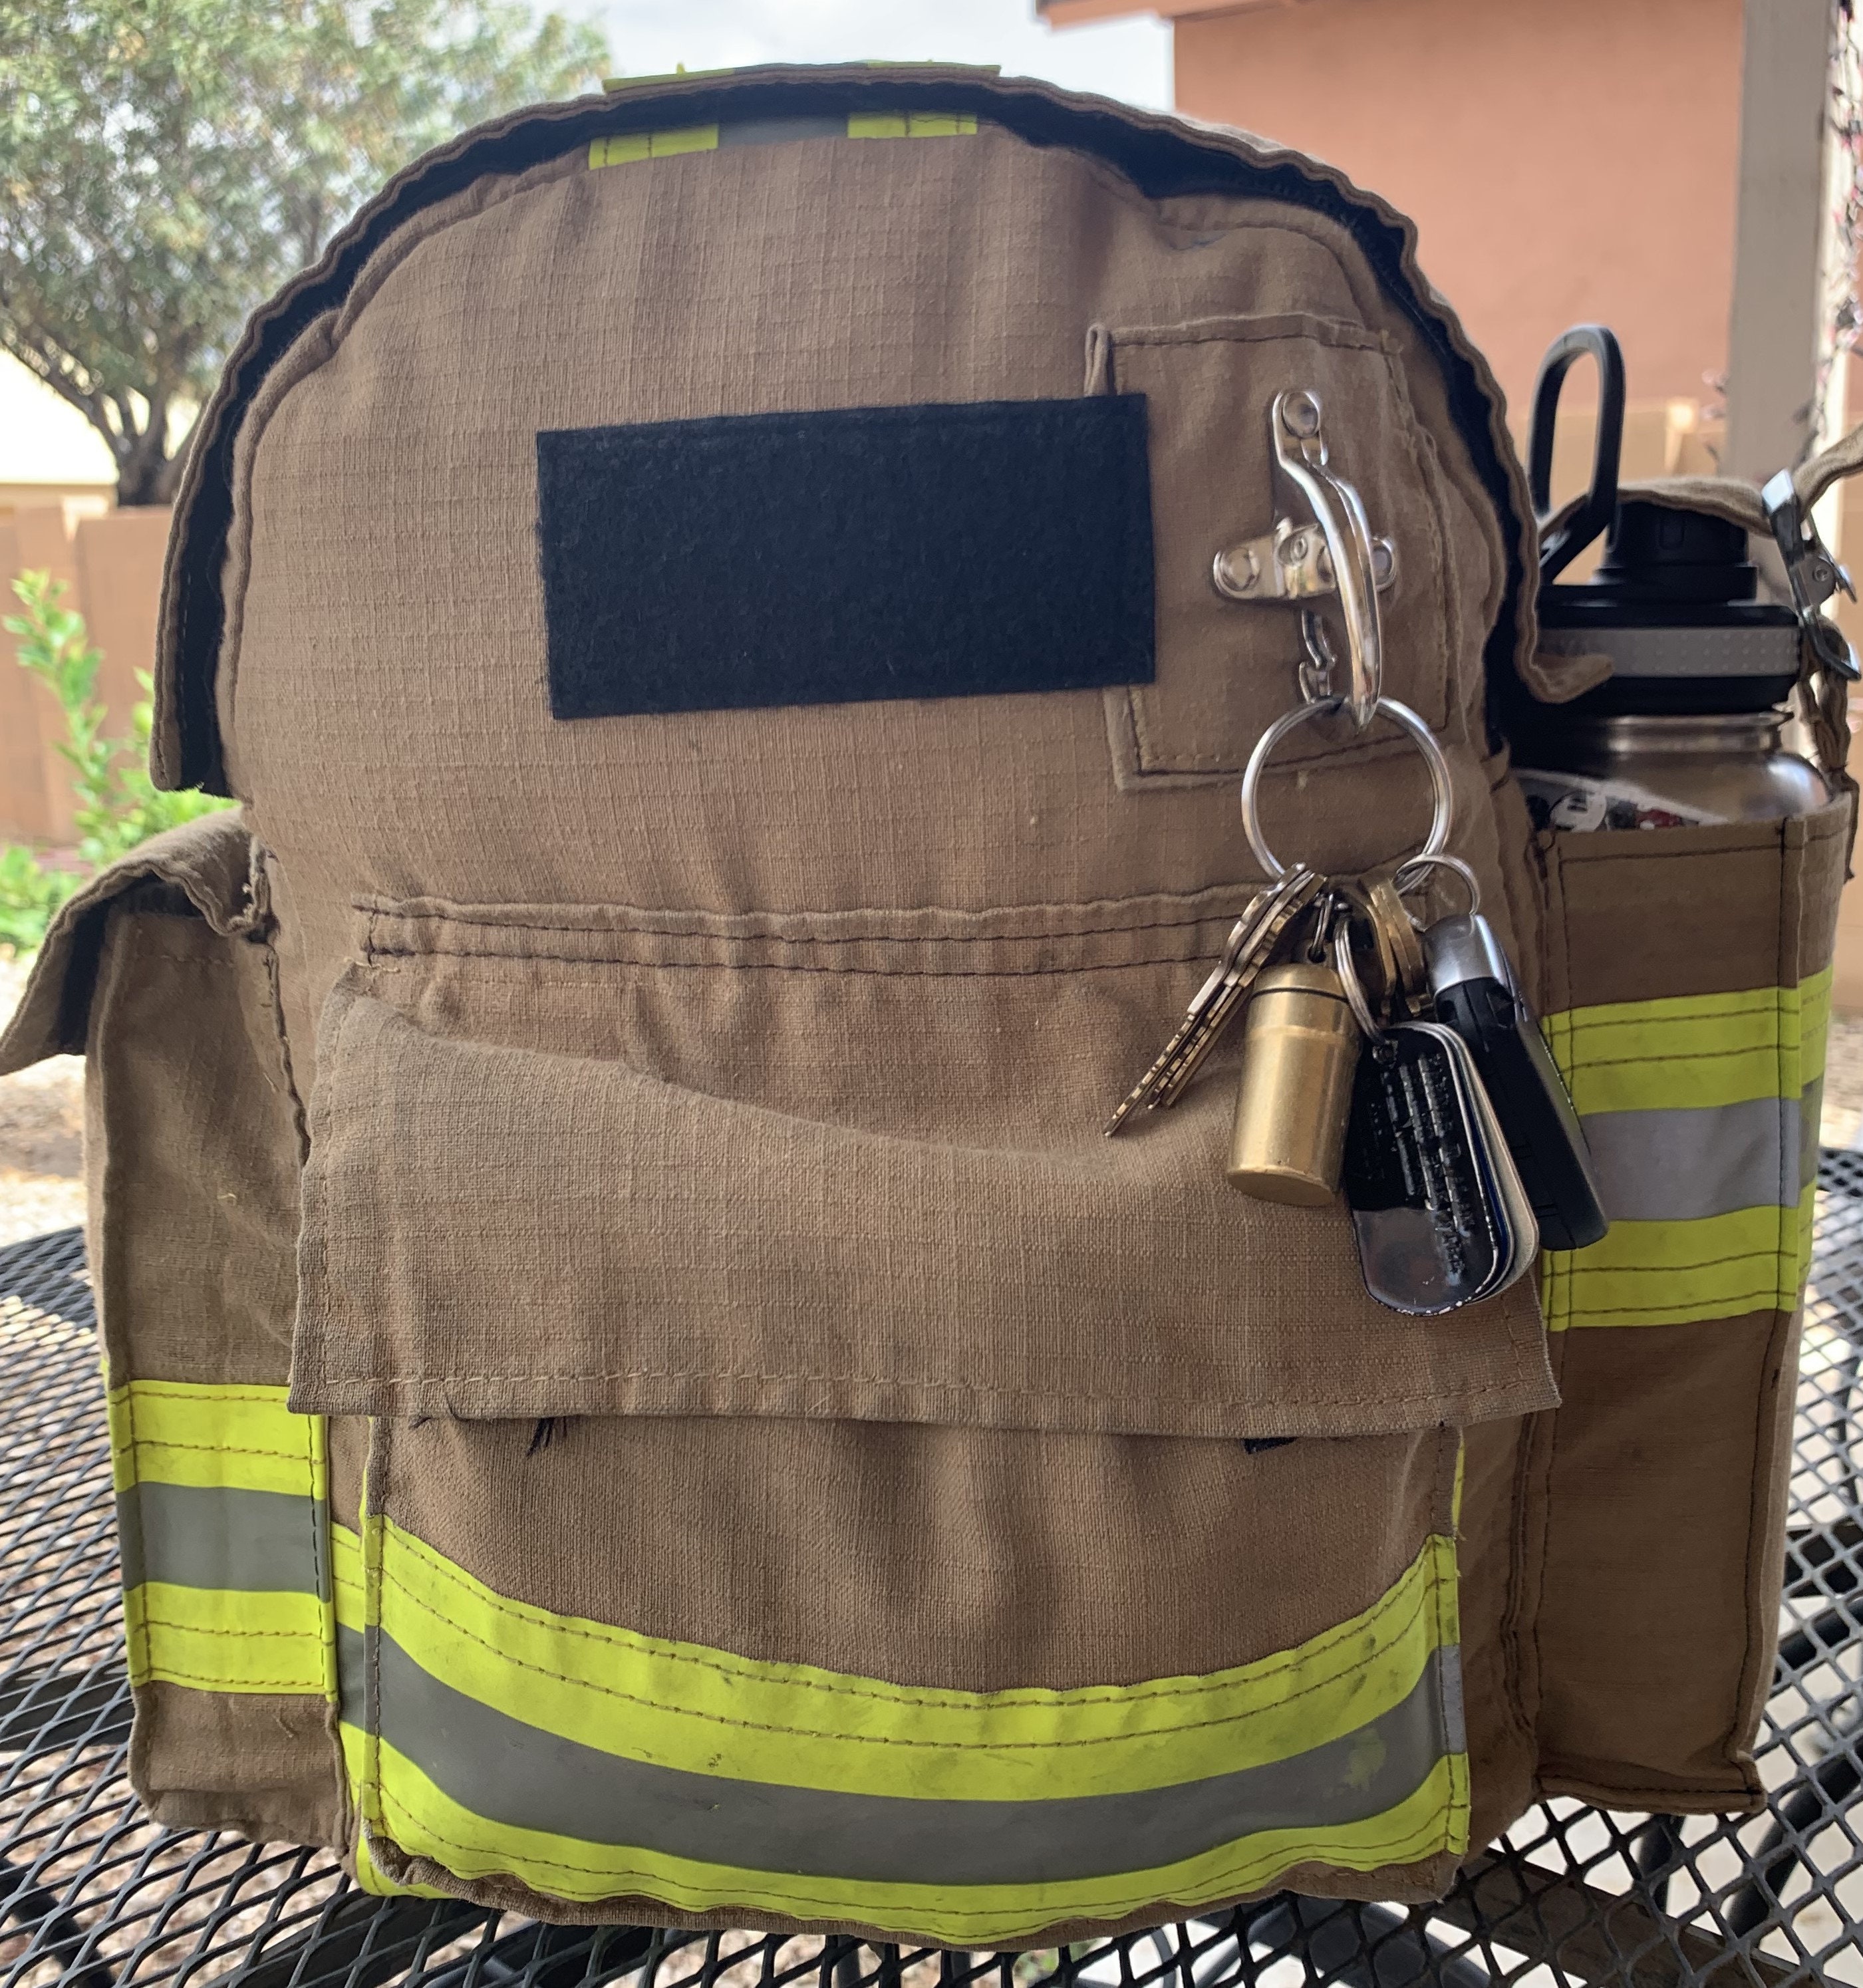 Turnout Gear Backpack, a Distinctive and Practical Accessory for